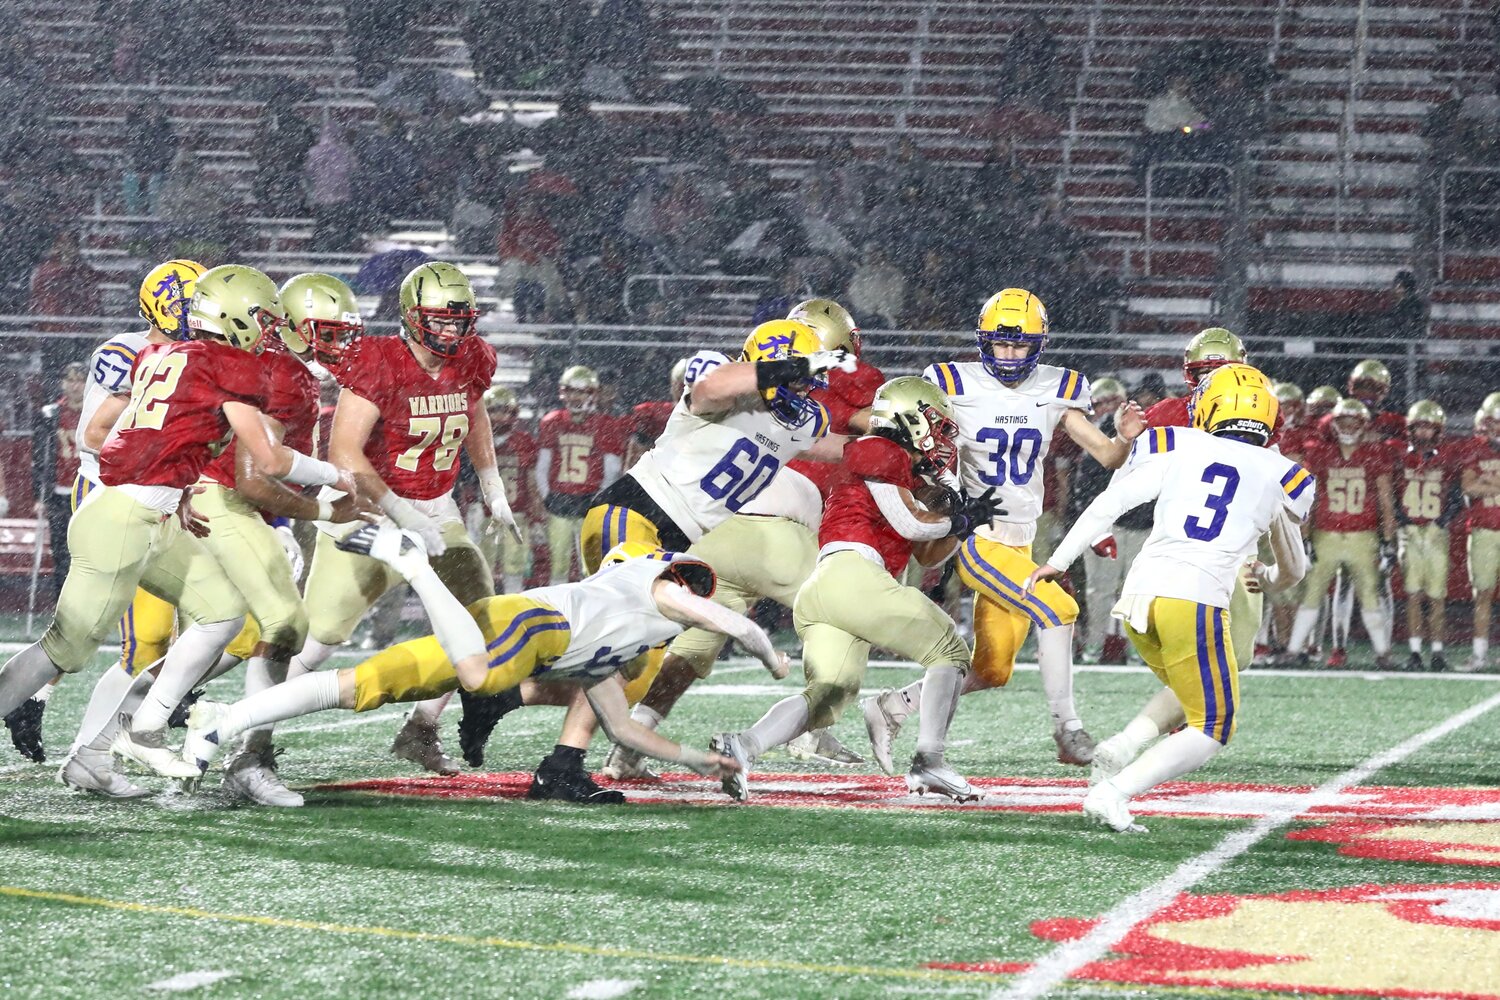 The Raider defense was in for a long, wet night at Two Rivers. The Warrior offense beat up on the Raider defensive line all night, but the Raiders kept fighting hoping to keep the season alive.